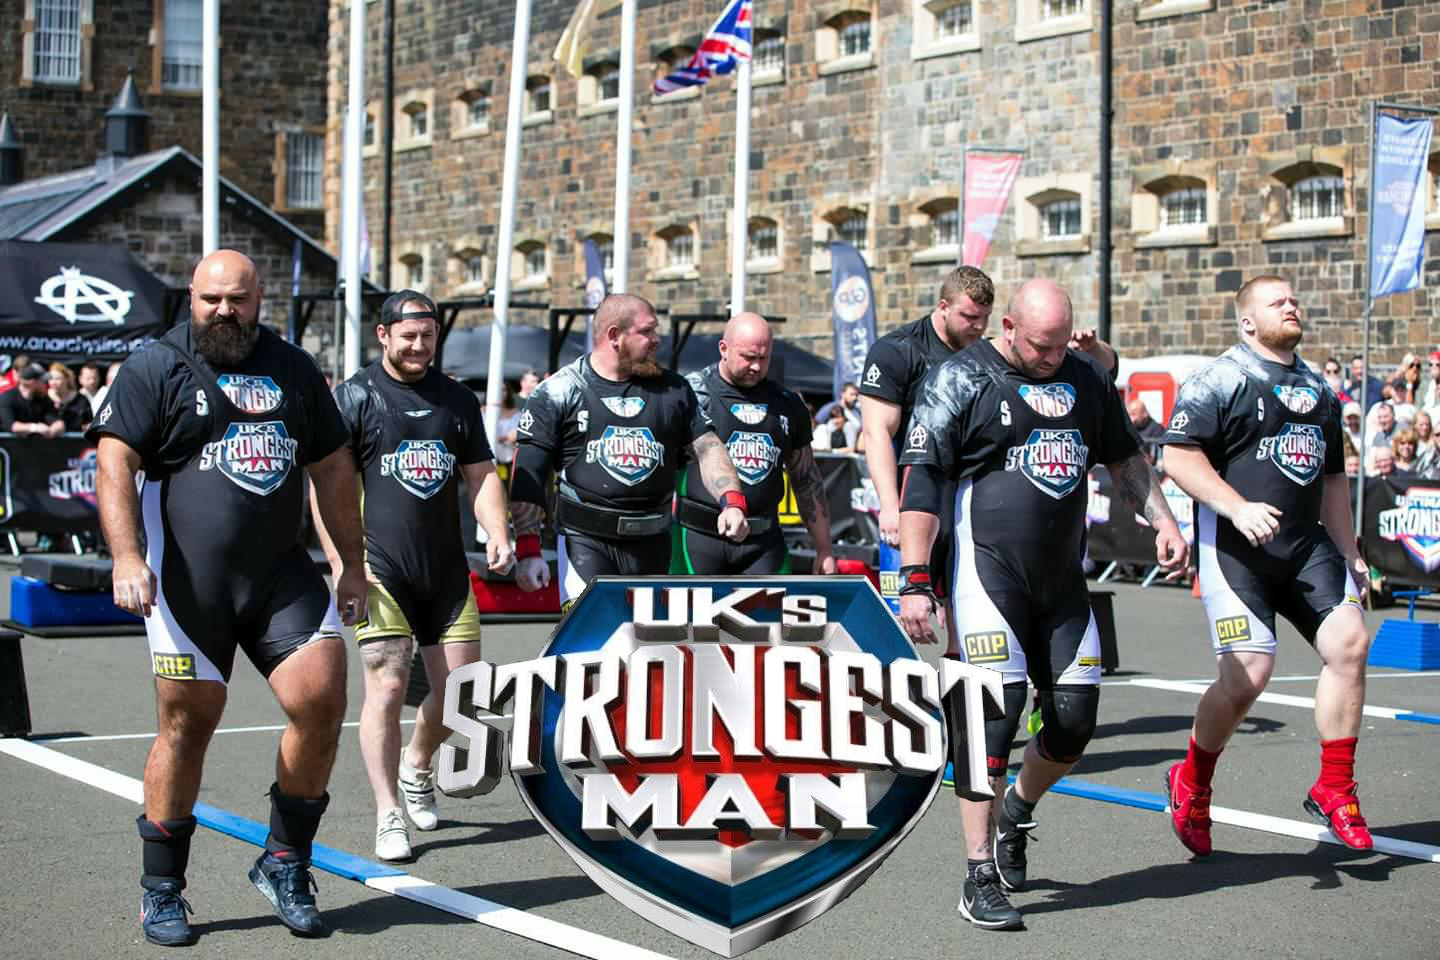 Ultimate Strongman » Tickets go on sale for XV UK Strongest Man 2018 on 5th February, 6pm